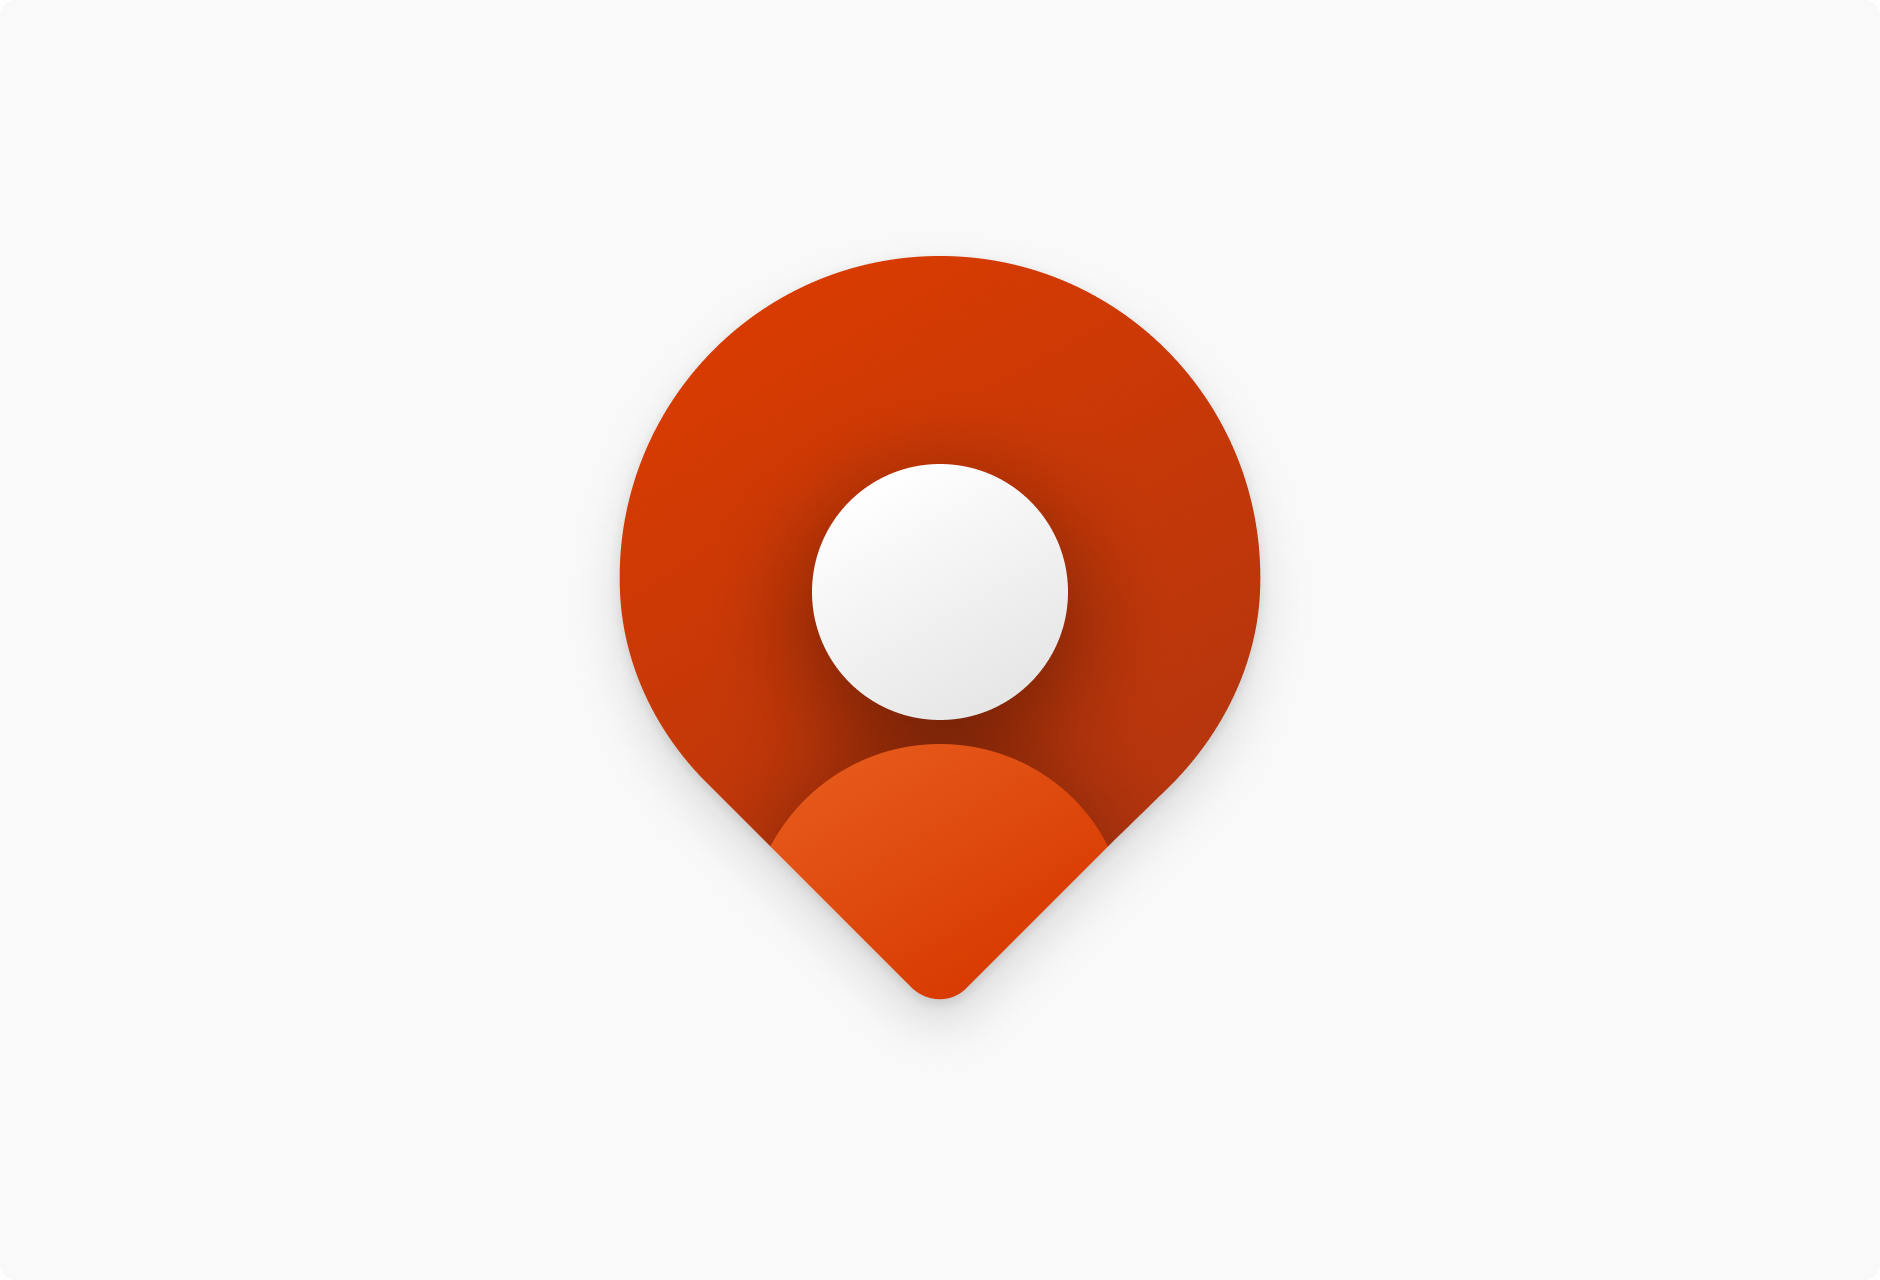 An abstract application icon for a hypothetical maps app